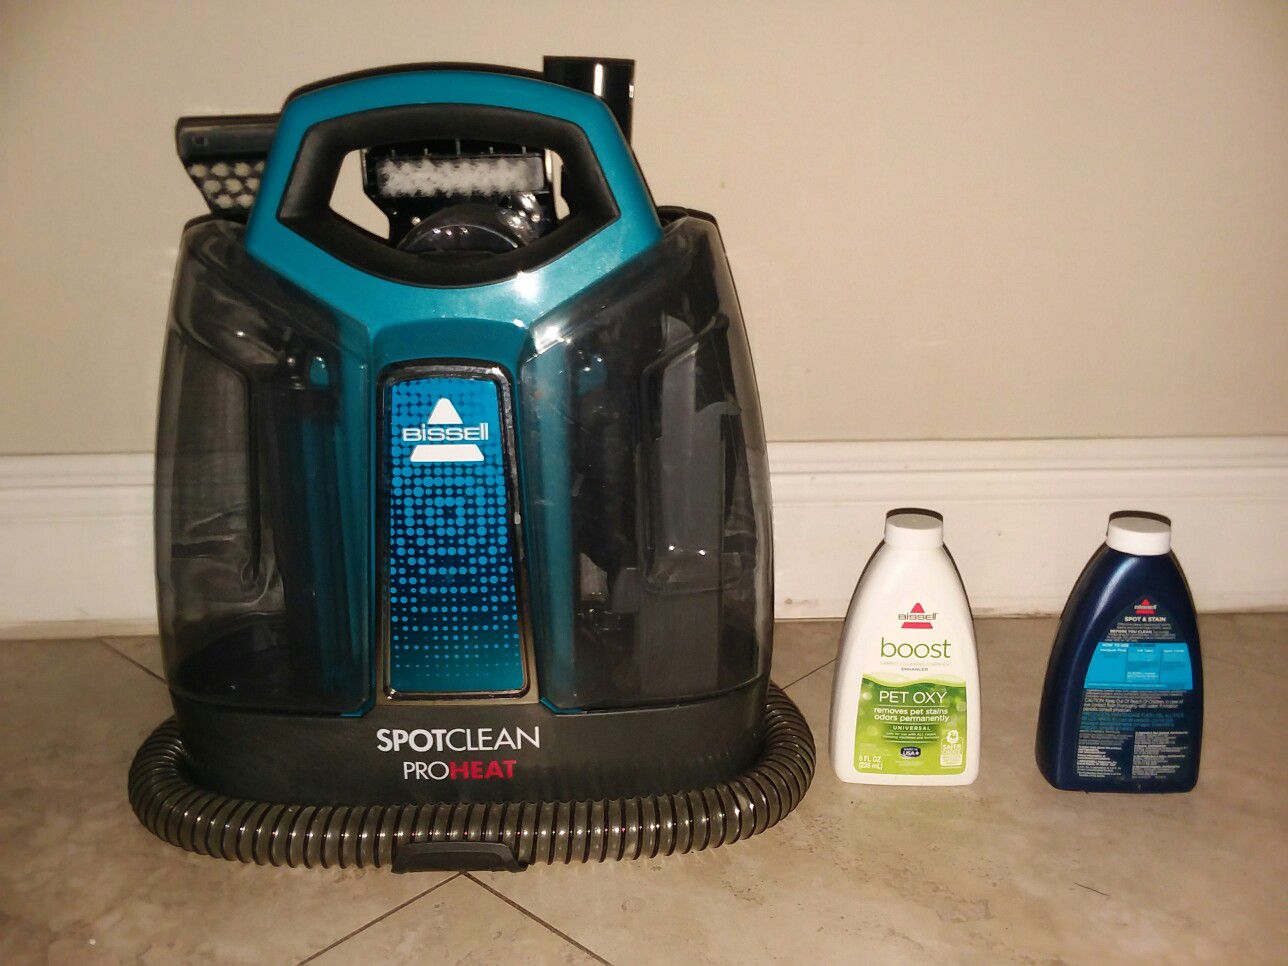 Bisselle spotclean proheat used twice.